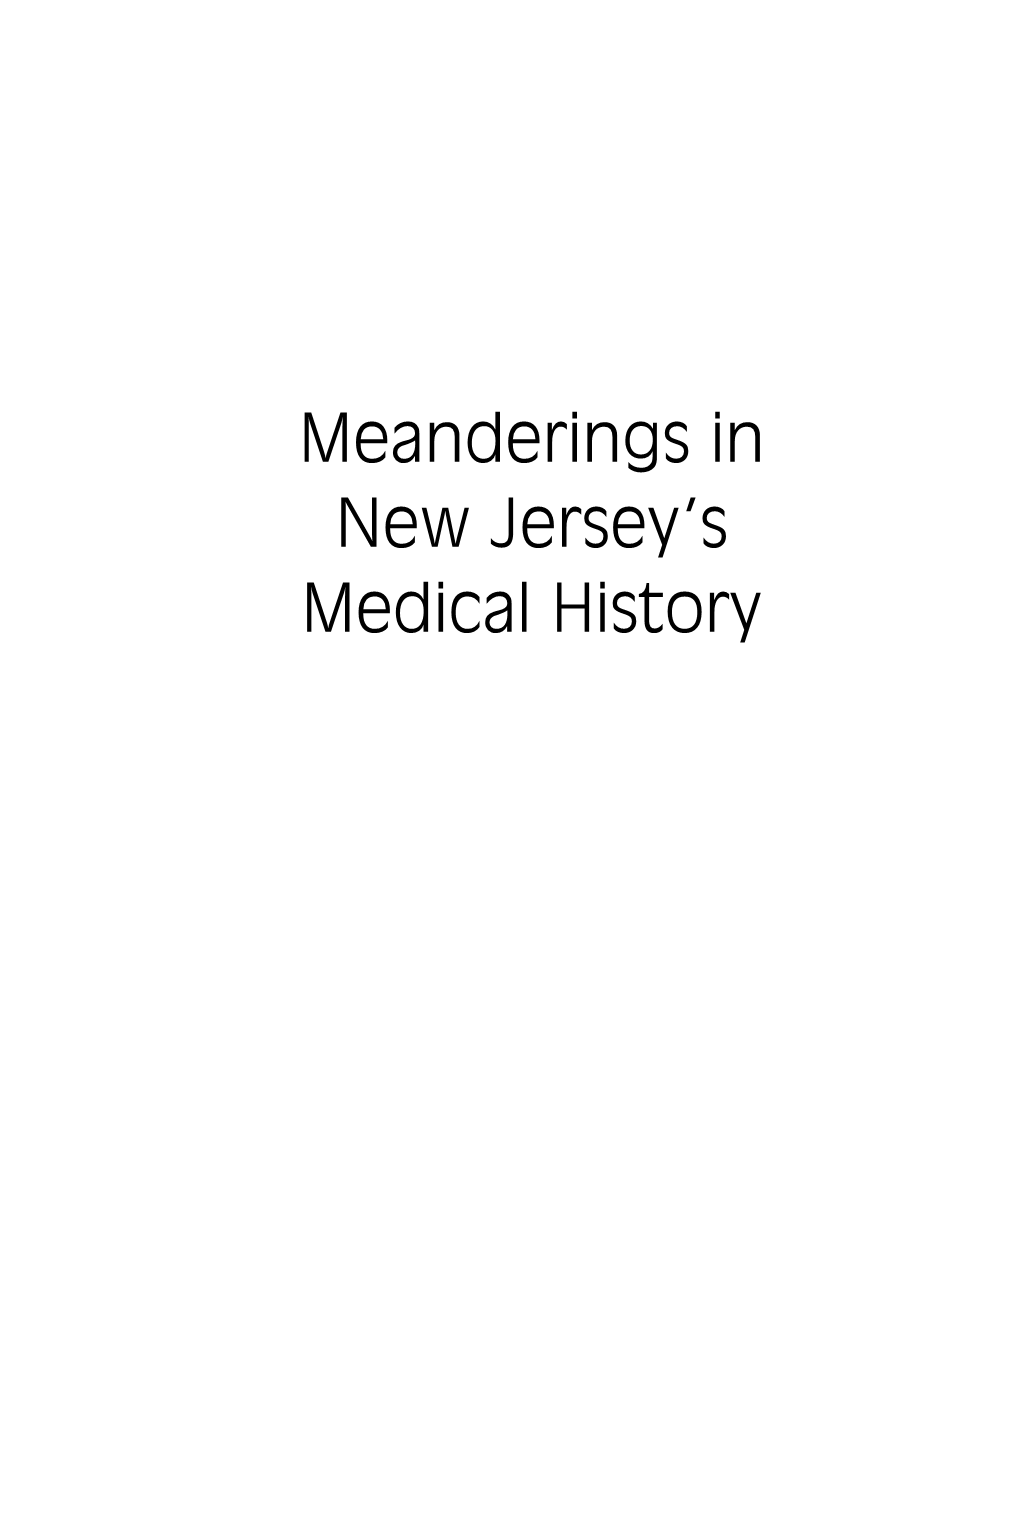 Meanderings in New Jersey's Medical History